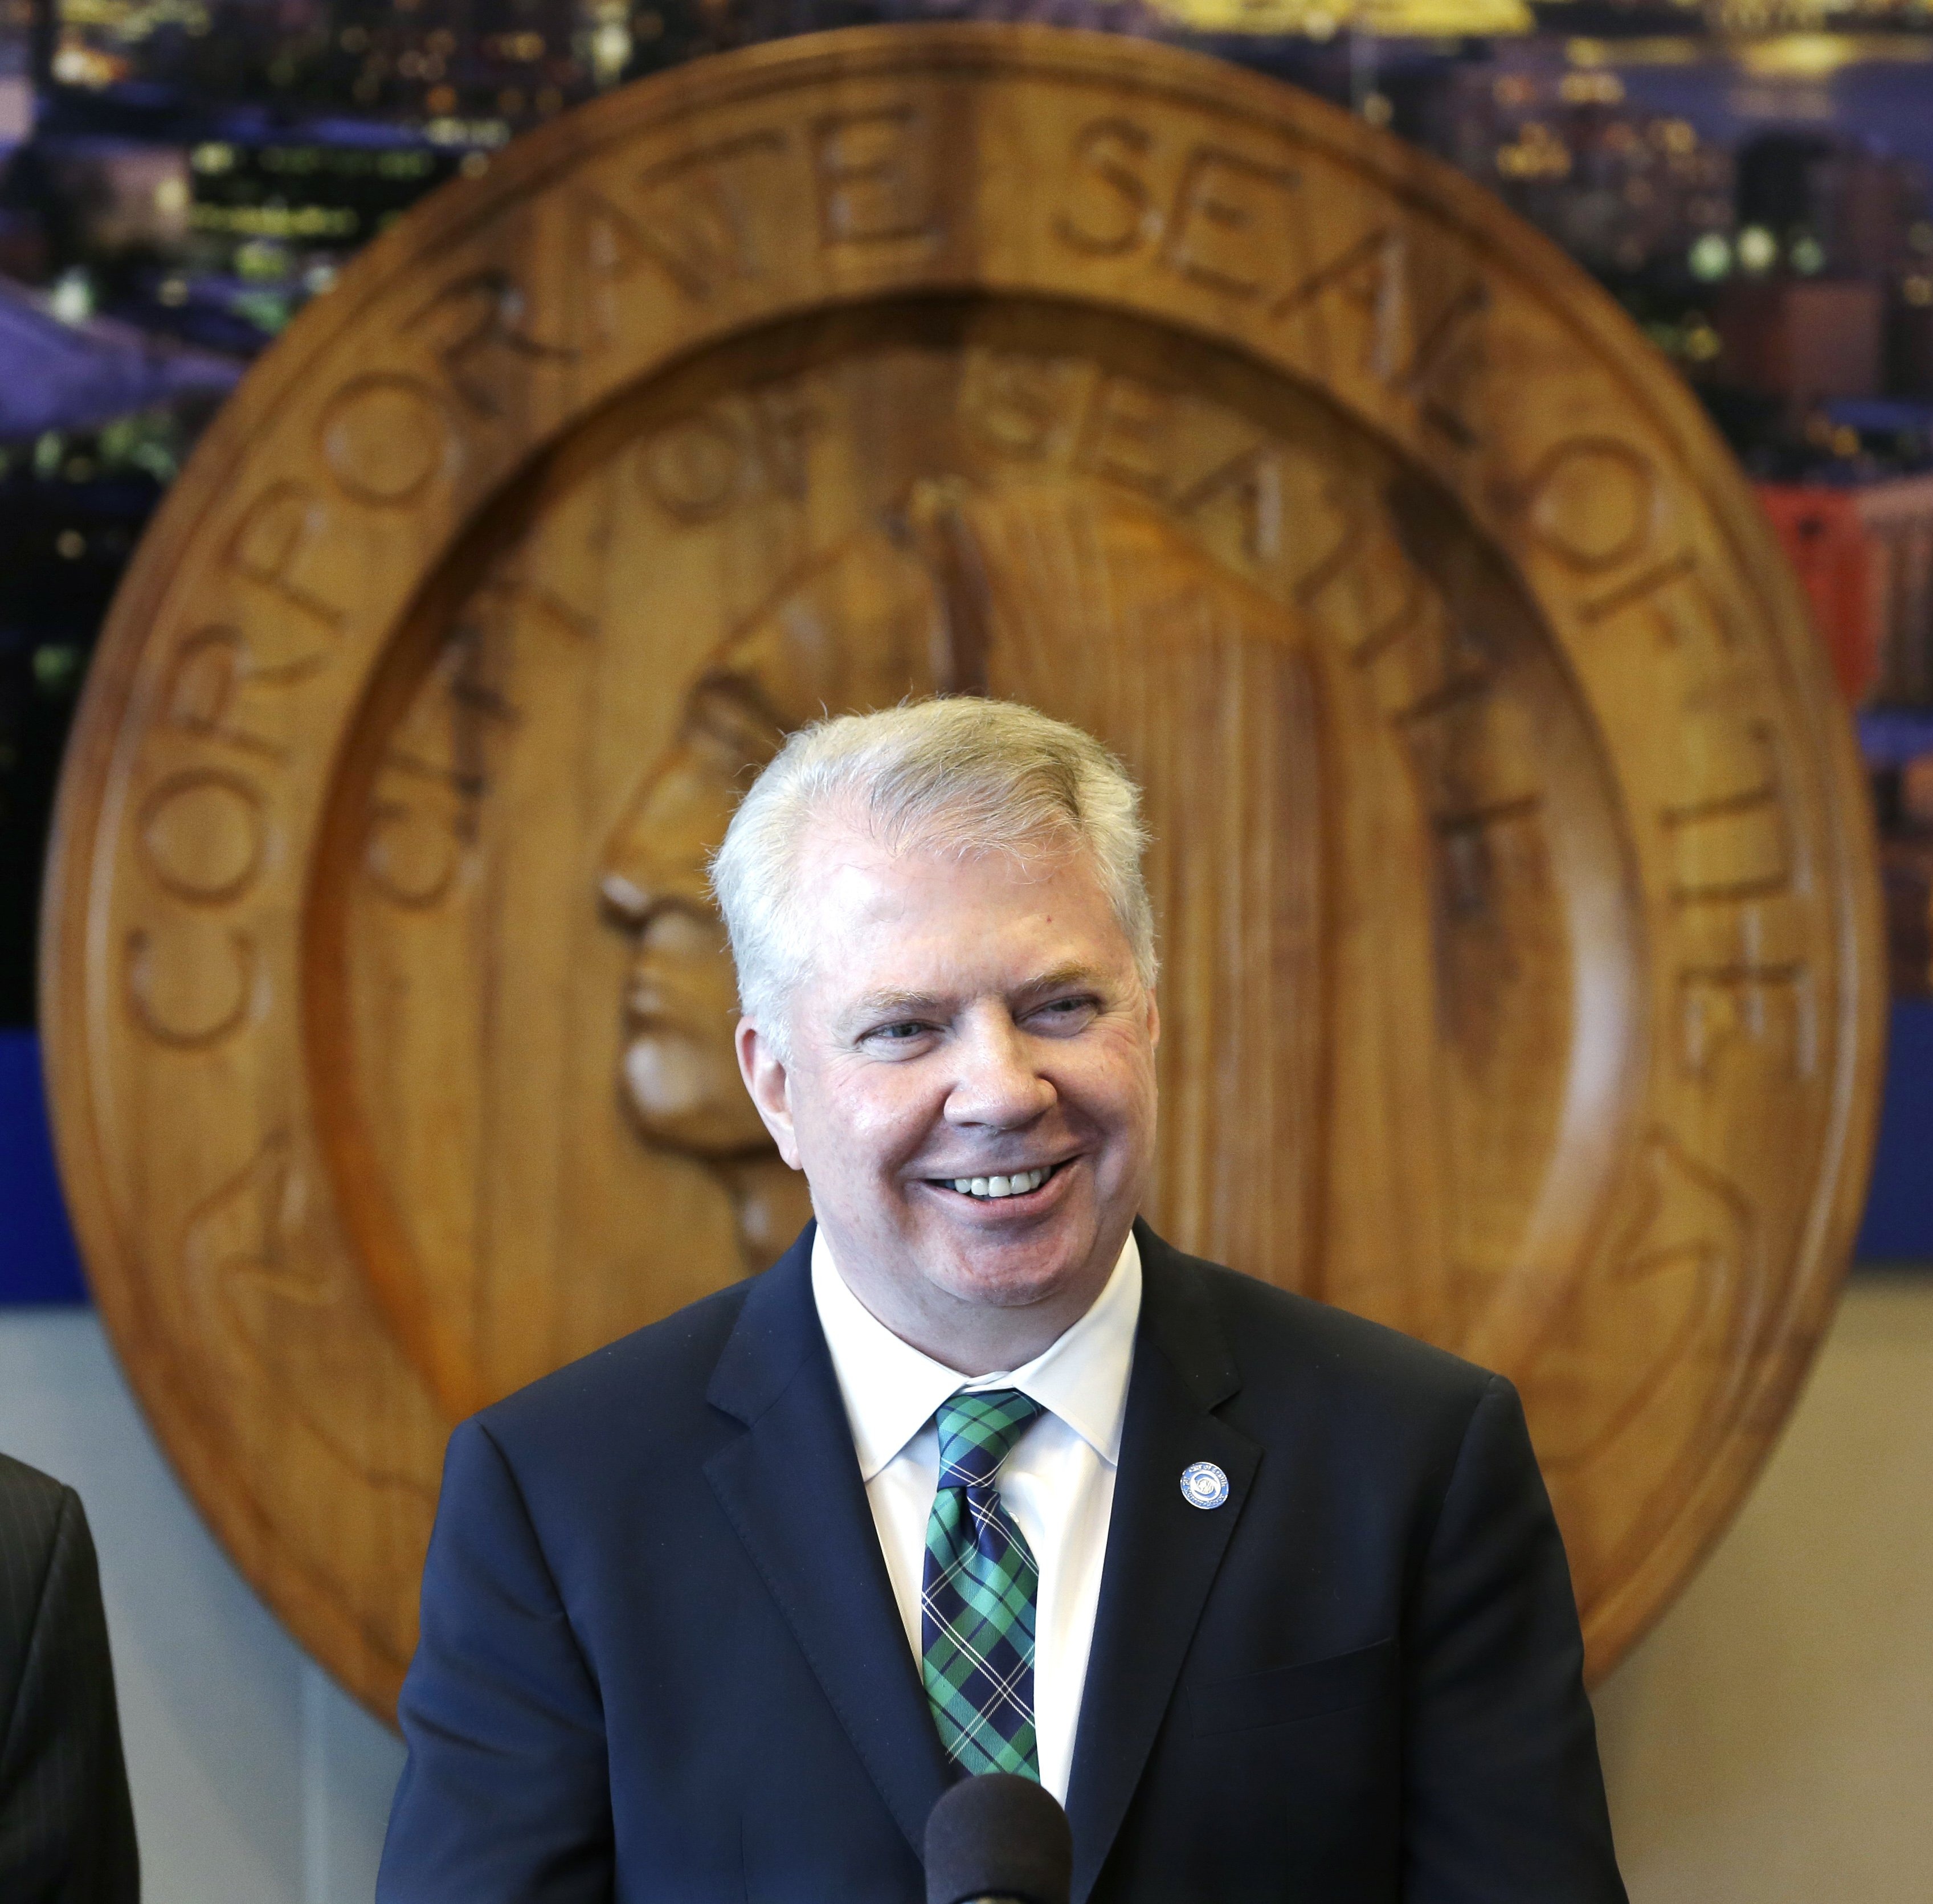 Seattle Mayor Ed Murray smiles as he addresses a news conference on a proposal to increase the minimum wage in the city Thursday, April 24, 2014, in Seattle. (Elaine Thompson&mdash;AP)